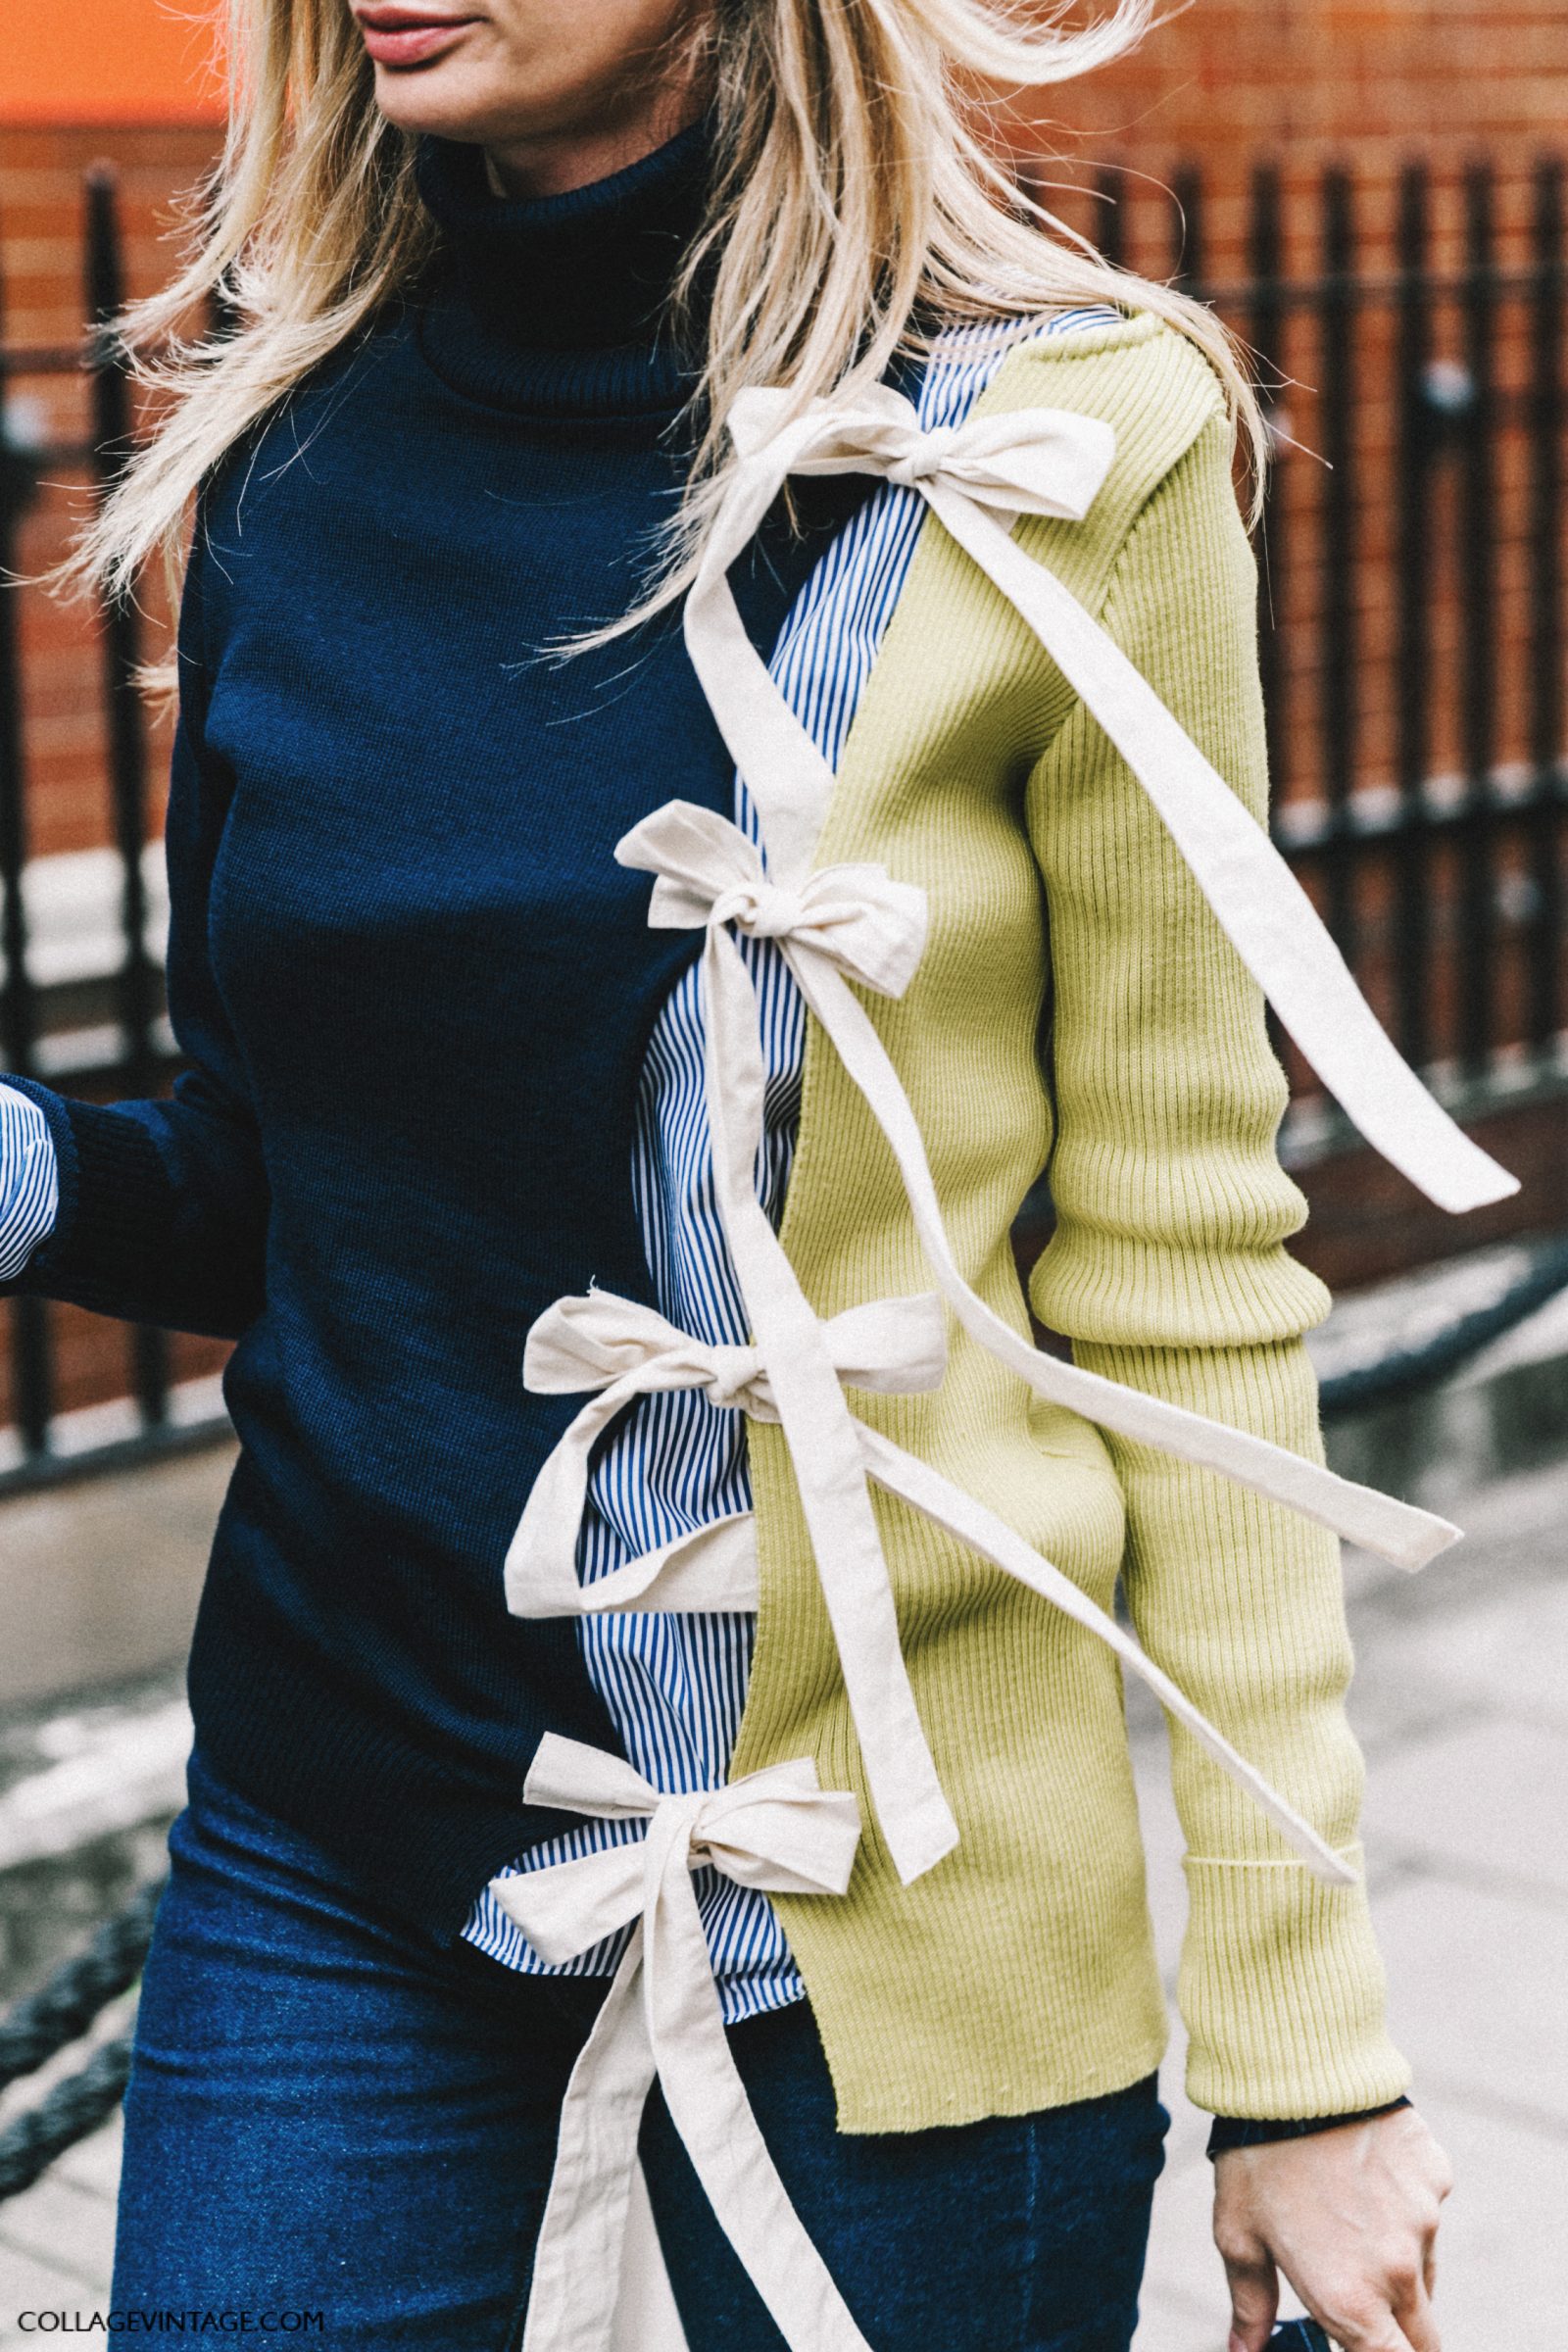 lfw-london_fashion_week_ss17-street_style-outfits-collage_vintage-vintage-jw_anderson-house_of_holland-57